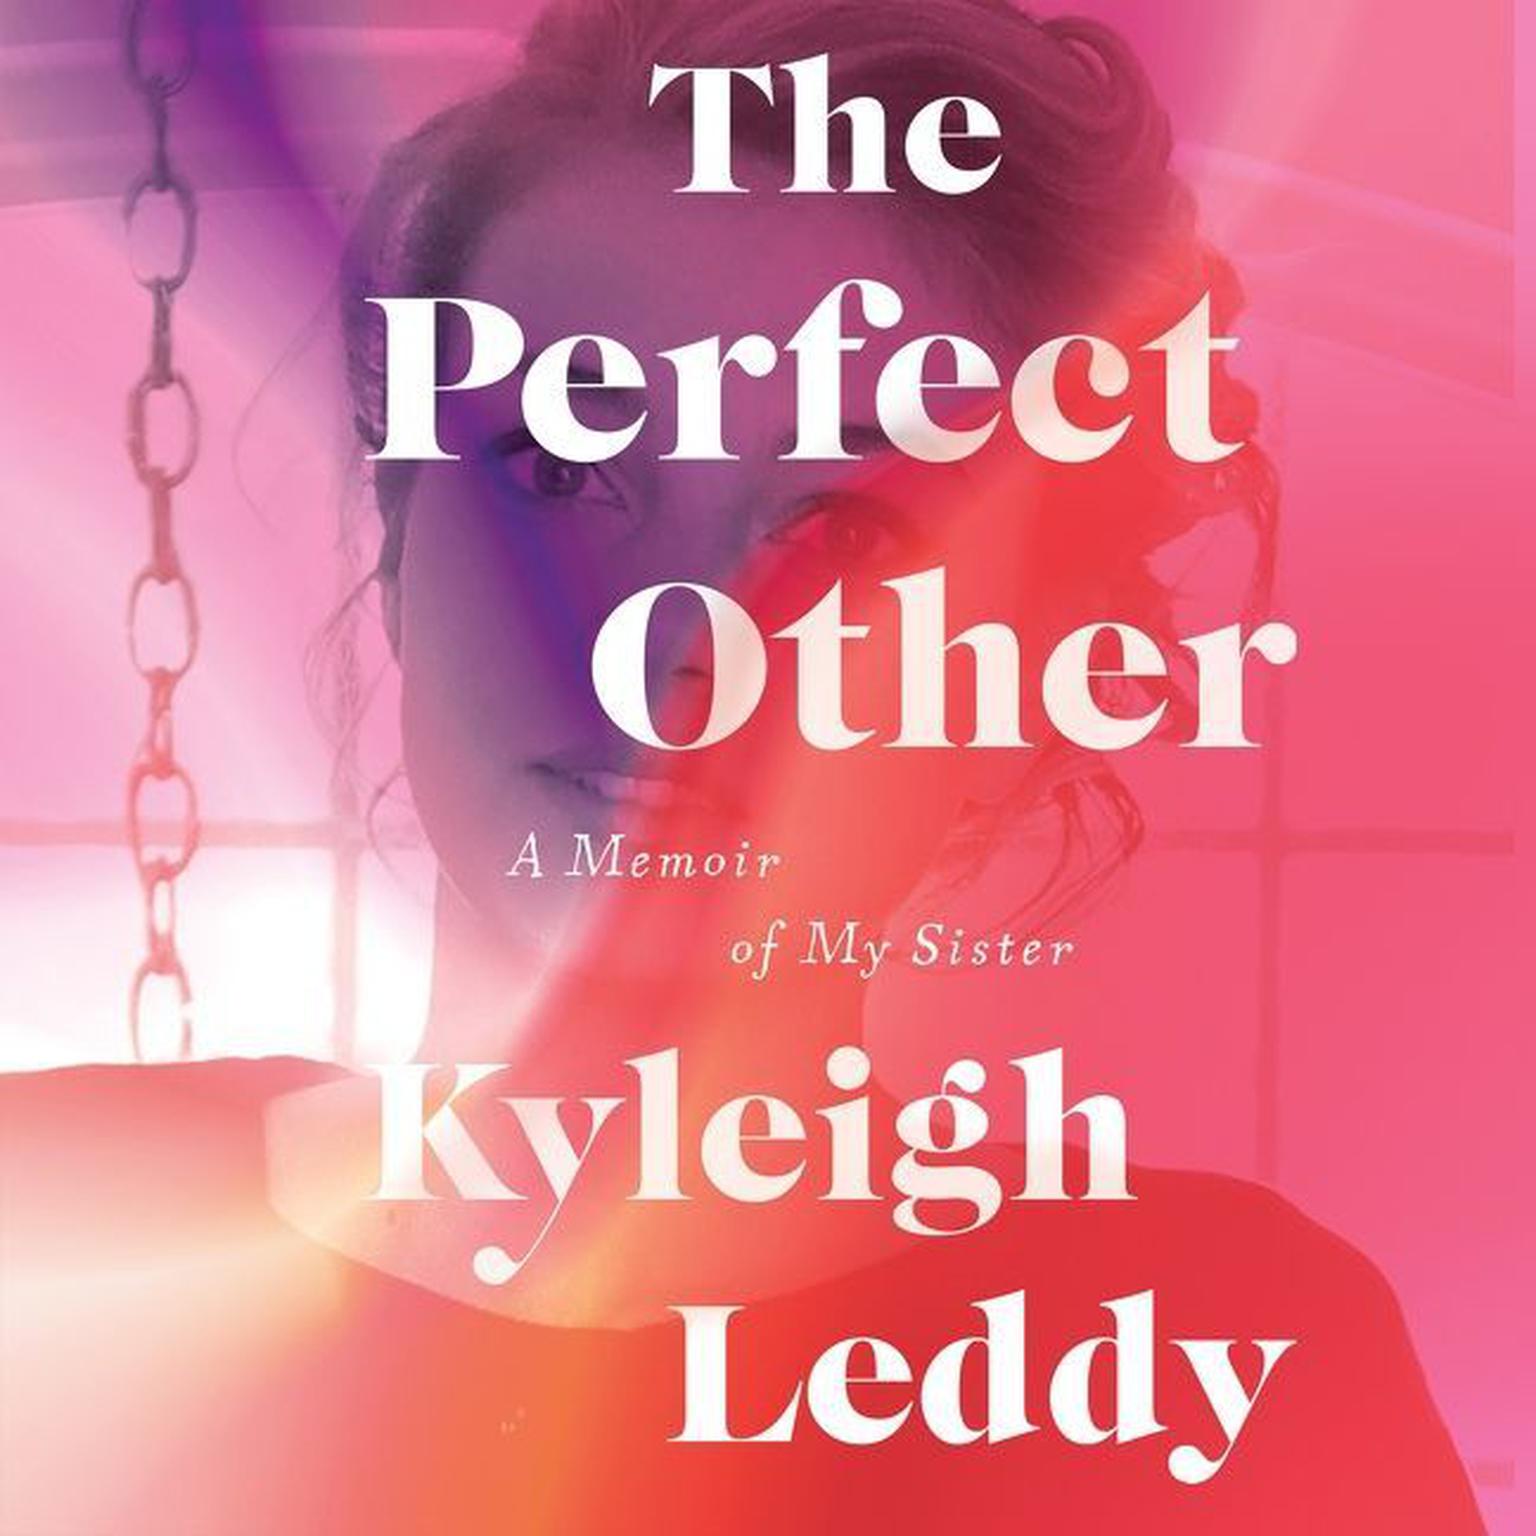 The Perfect Other: A Memoir of My Sister Audiobook, by Kyleigh Leddy